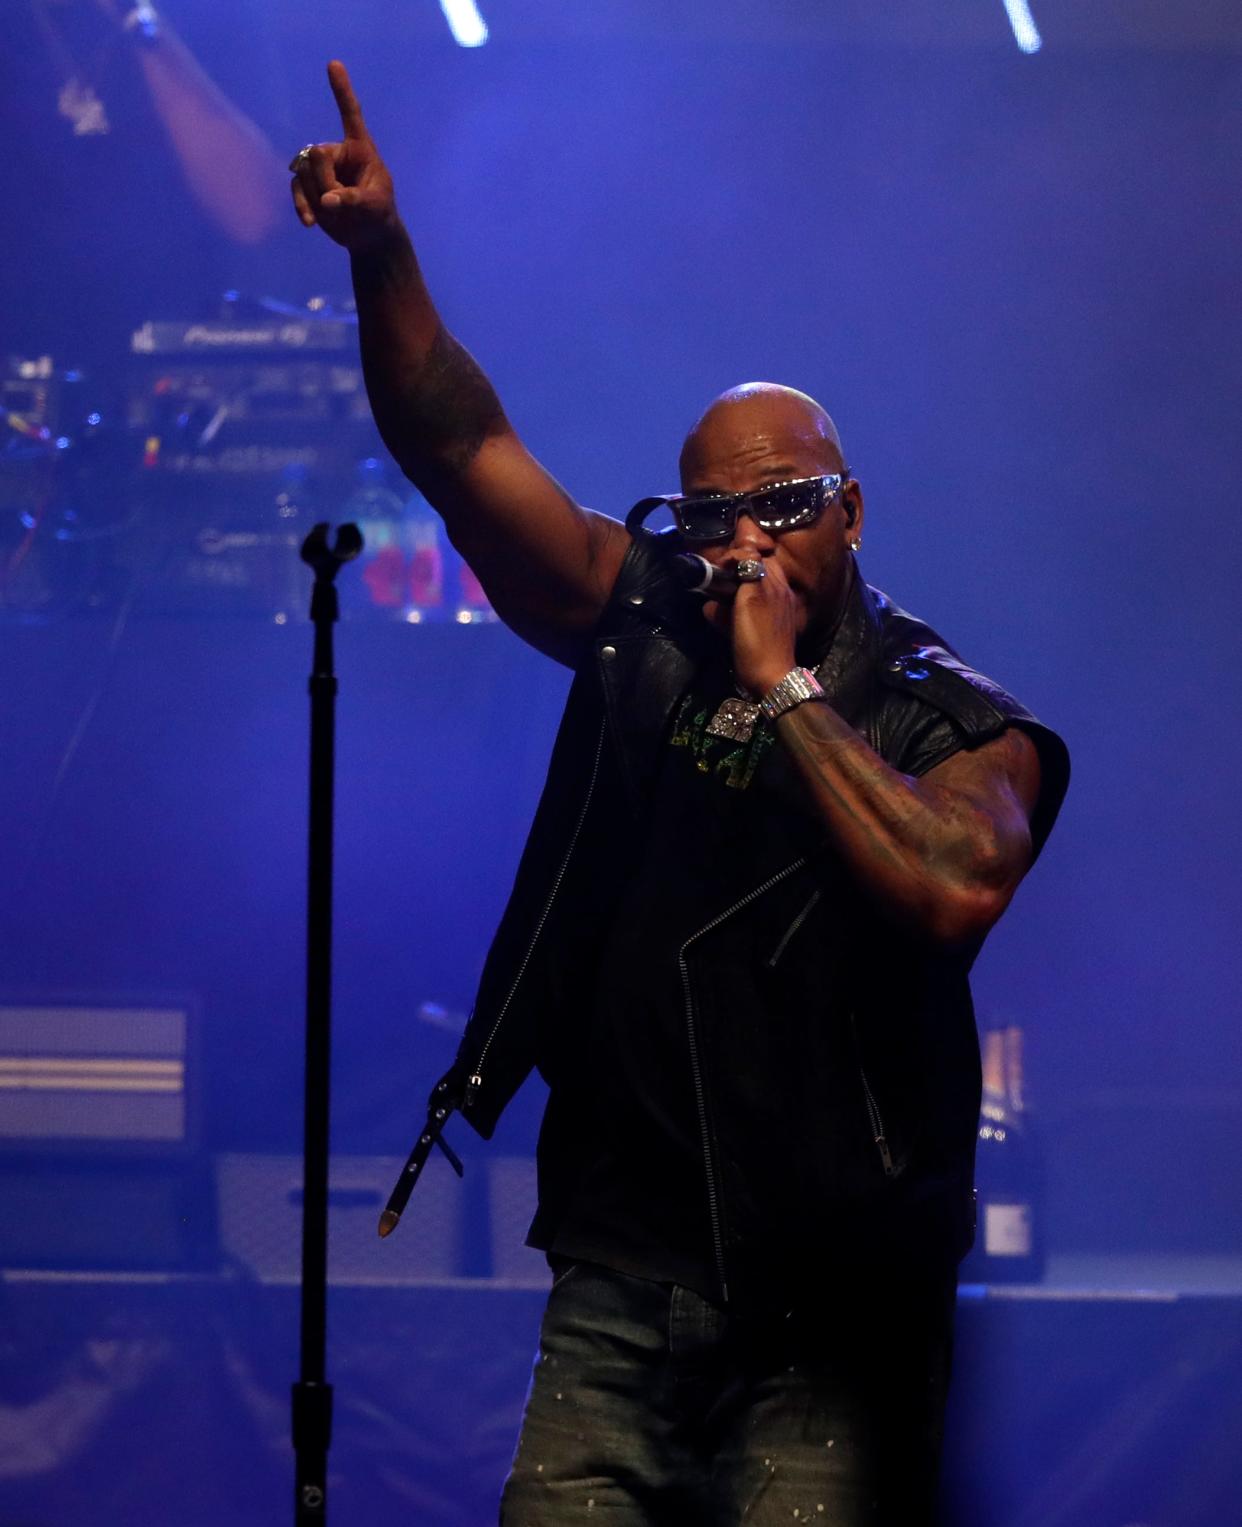 Flo Rida performs in in Green Bay, Wisconsin in June. The hip-hop artist will perform in Ventura on July 16 at the Tequila & Taco Music Festival.